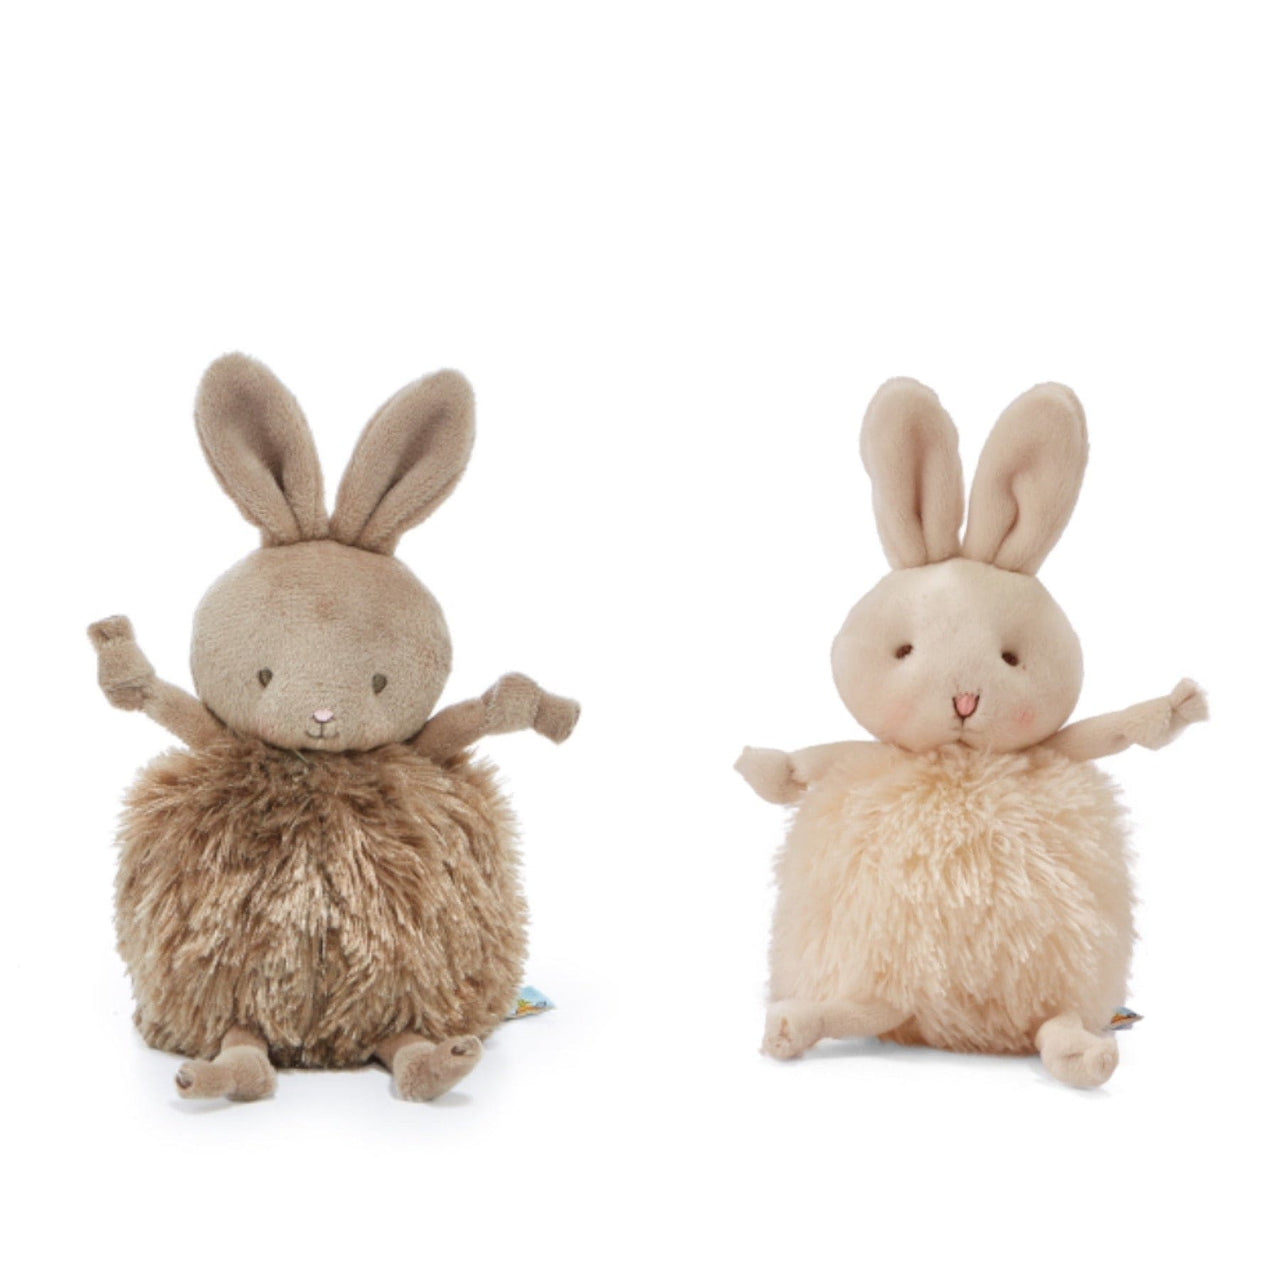 Roly Poly Bunny Plush Bunnies By the Bay PLUSH